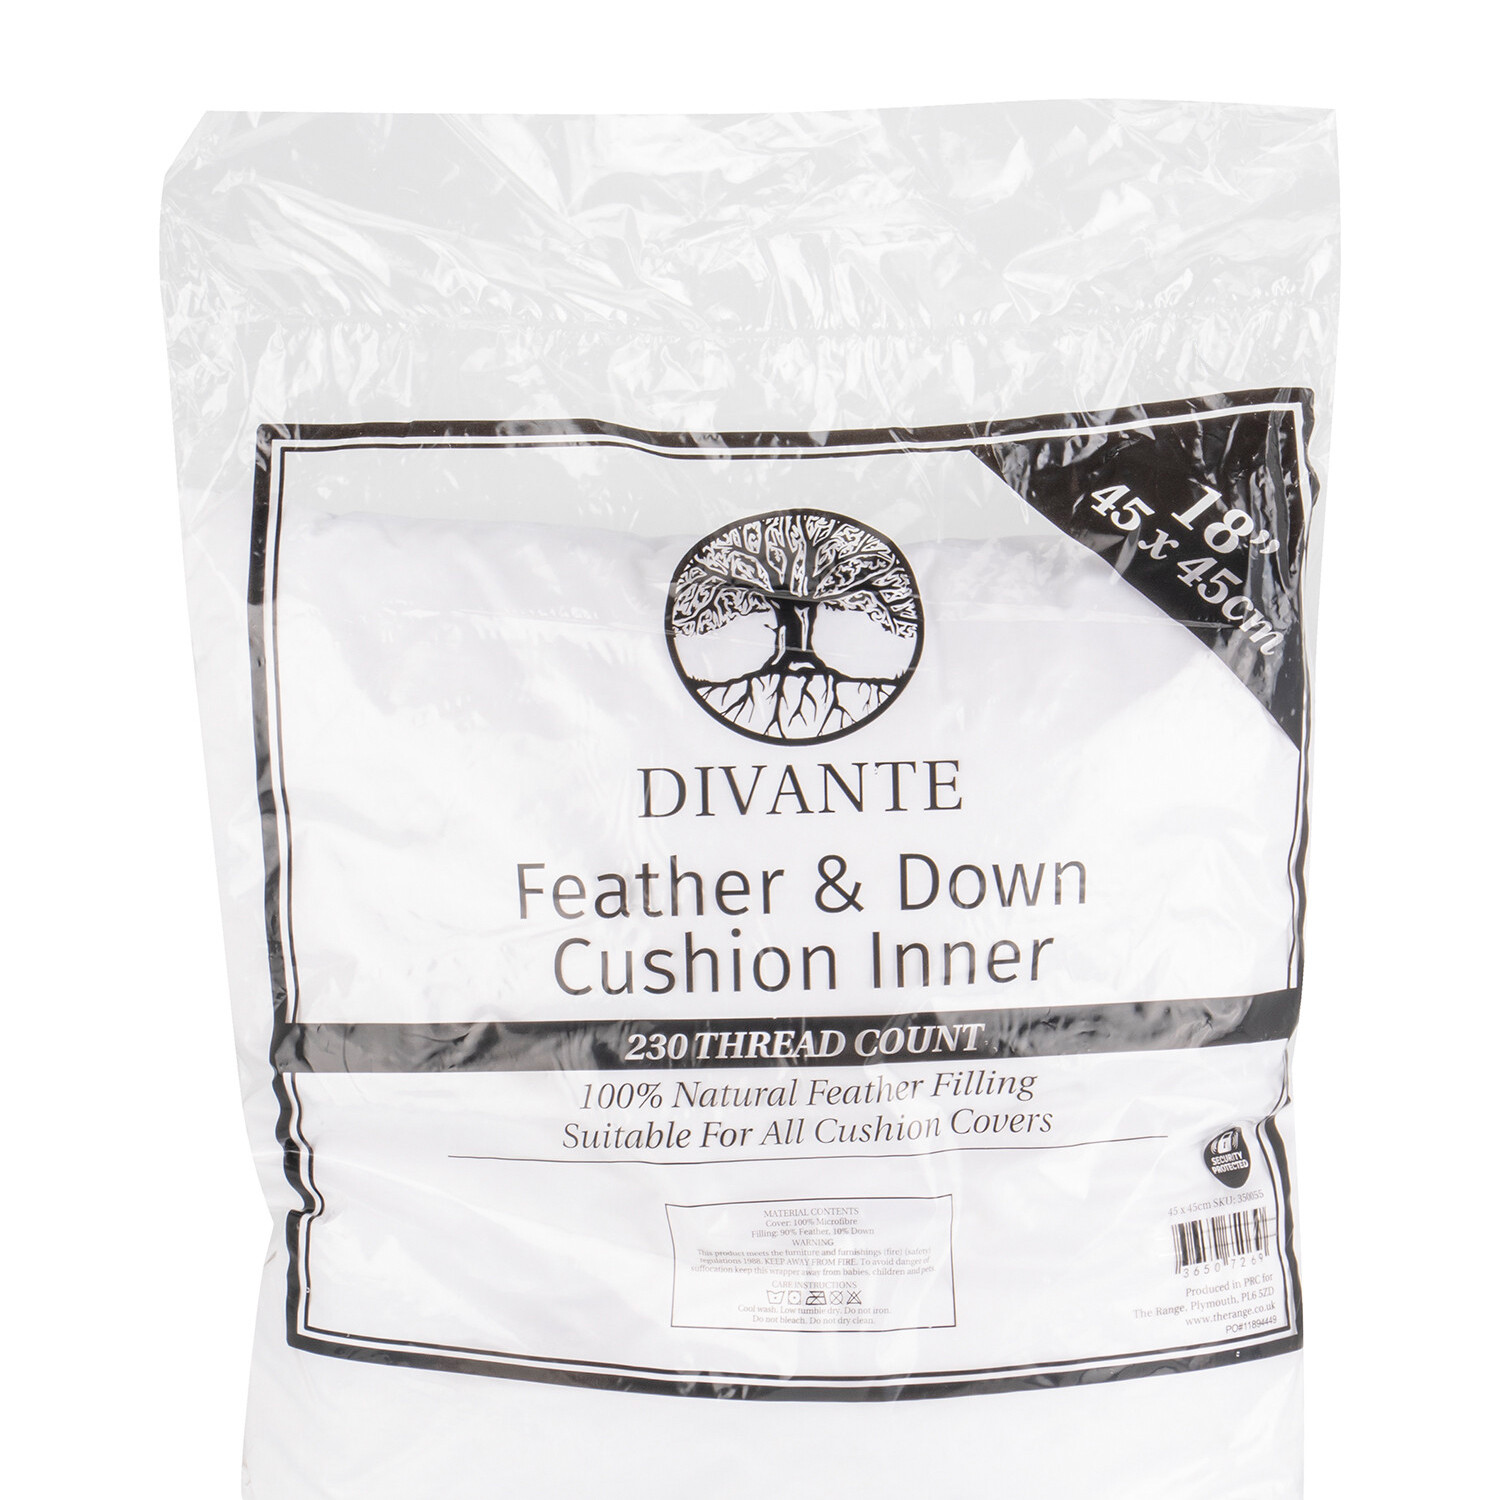 Divante Feather and Down Cushion Insert 45 x 45cm Image